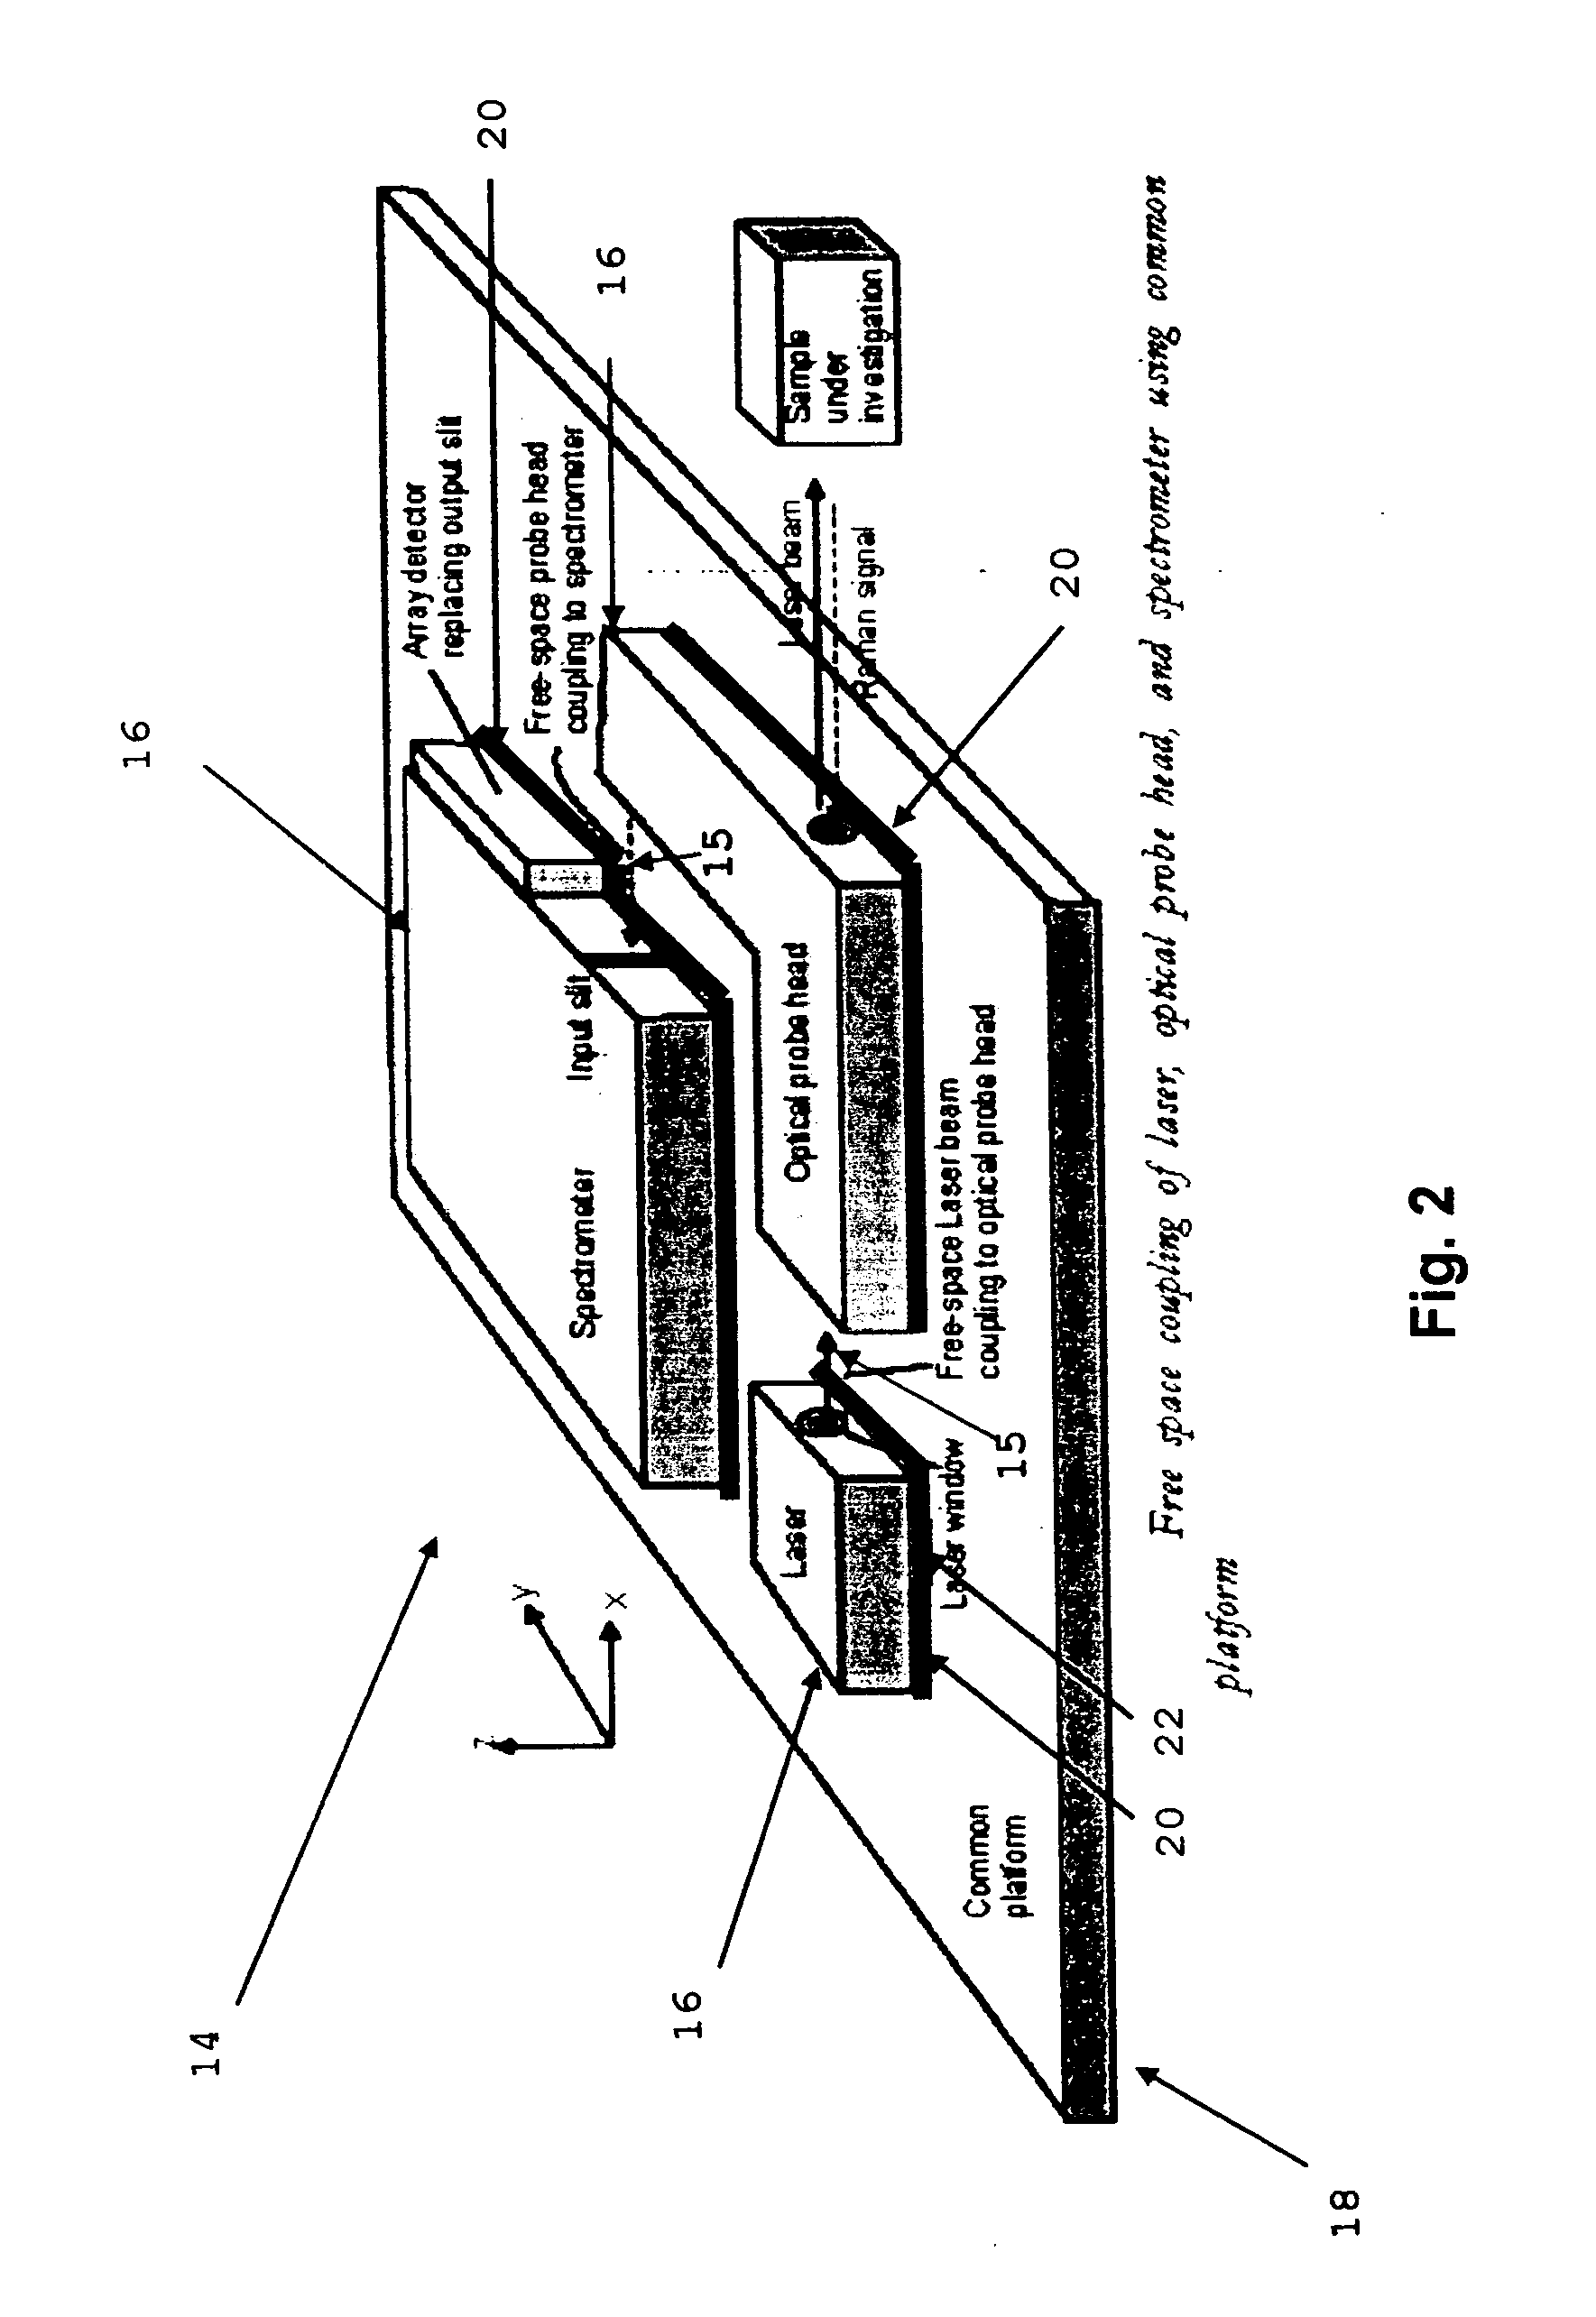 Use of free-space coupling between laser assembly, optical probe head assembly, spectrometer assembly and/or other optical elements for portable optical applications such as Raman instruments